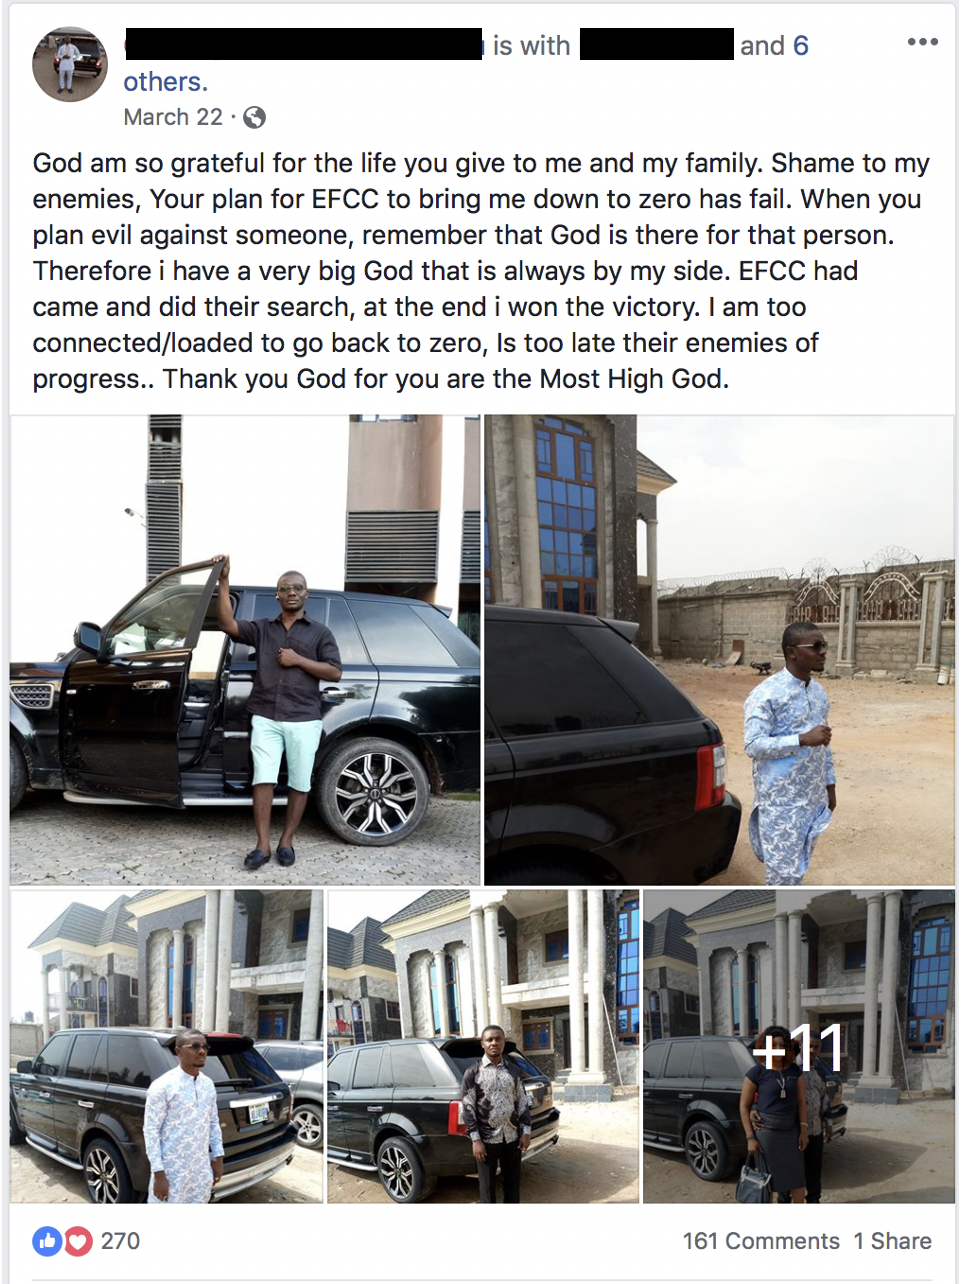 After the EFCC unsuccessfully attempted to make an arrest in 2018, the subject of the attempt wrote on social media, "God am so grateful for the life you give to me and my family. Shame to my enemies, Your plan for EFCC to bring me down to zero has fail. When you plan evil against someone, remember that God is there for that person. Therefore i have a very big God that is always by my side. EFCC had came and did their search, at the end i won the victory. I am too connected/loaded to go back to zero, is too late their enemies of progress. Thank you God for you are the Most High God."